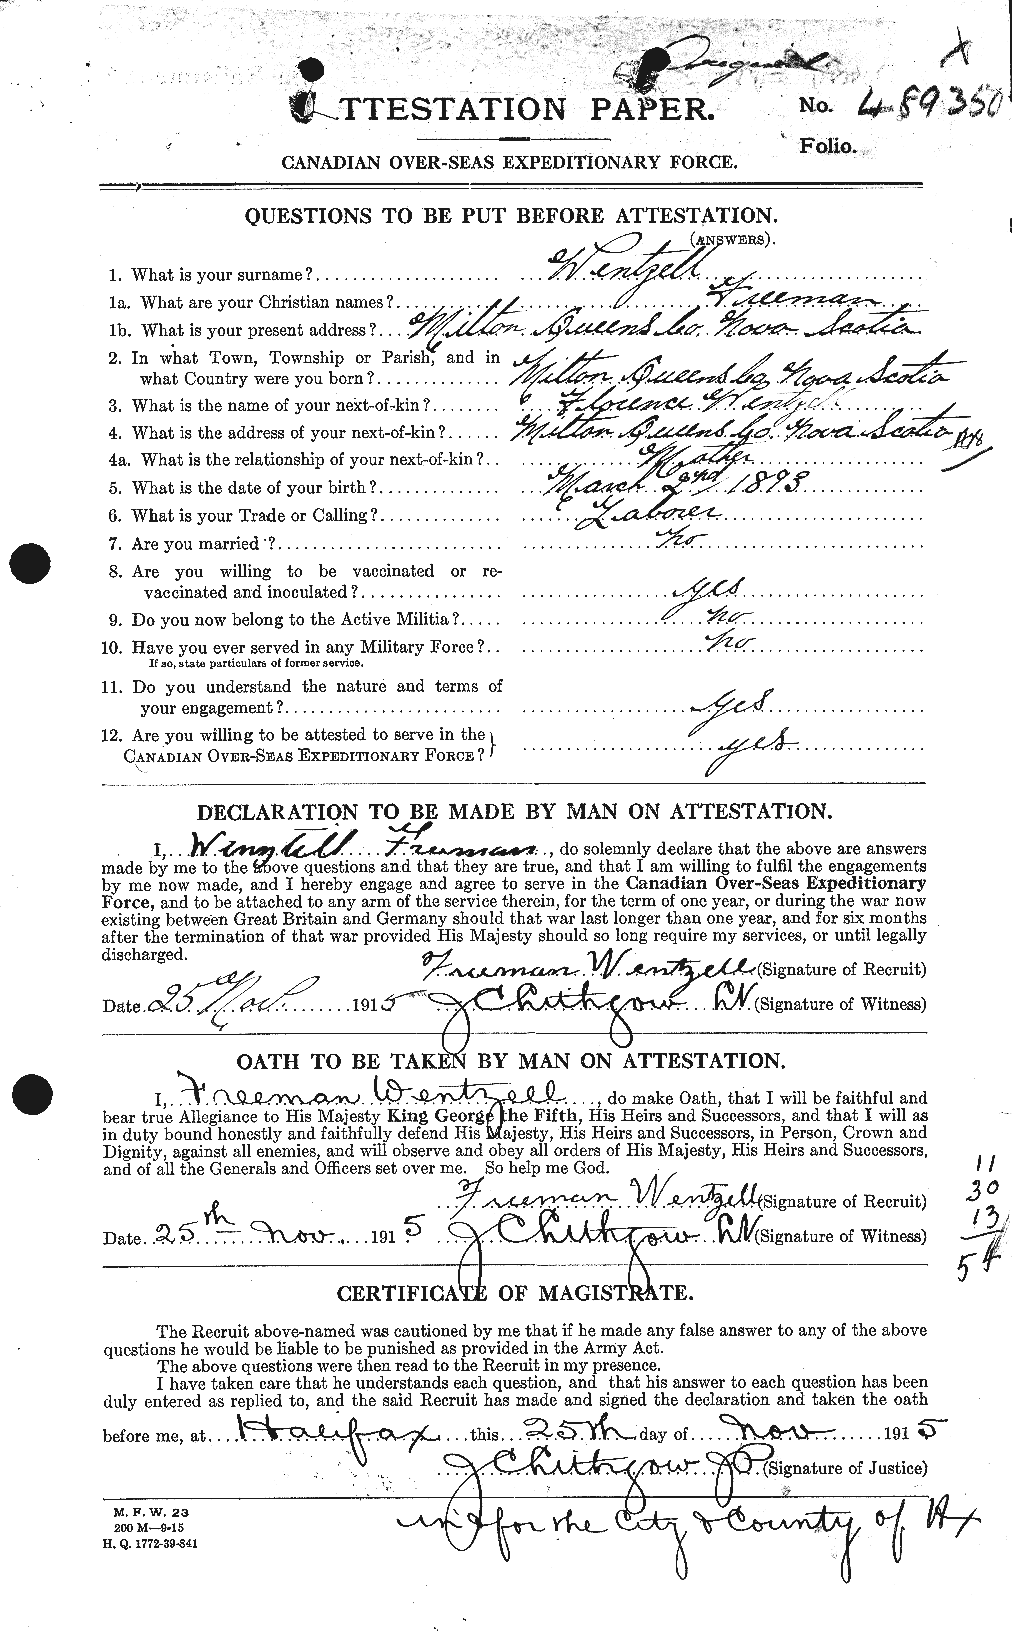 Personnel Records of the First World War - CEF 664650a